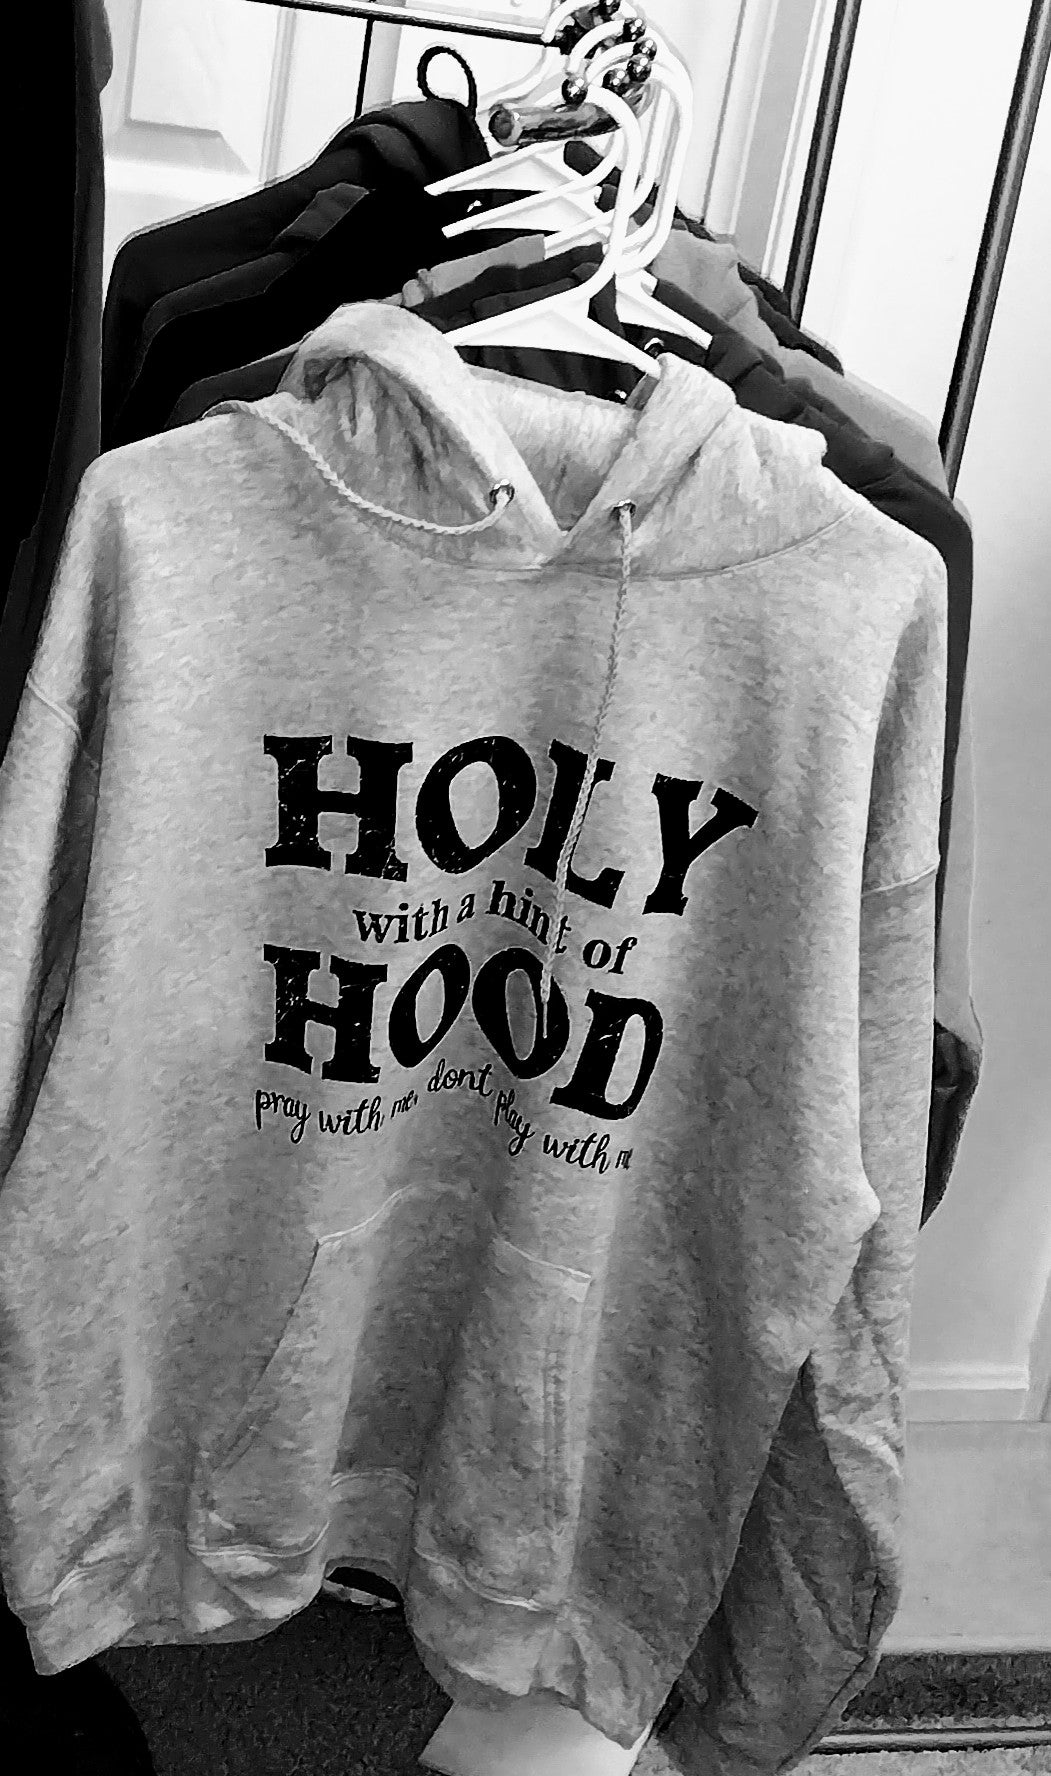 Holy with a hint of Hood